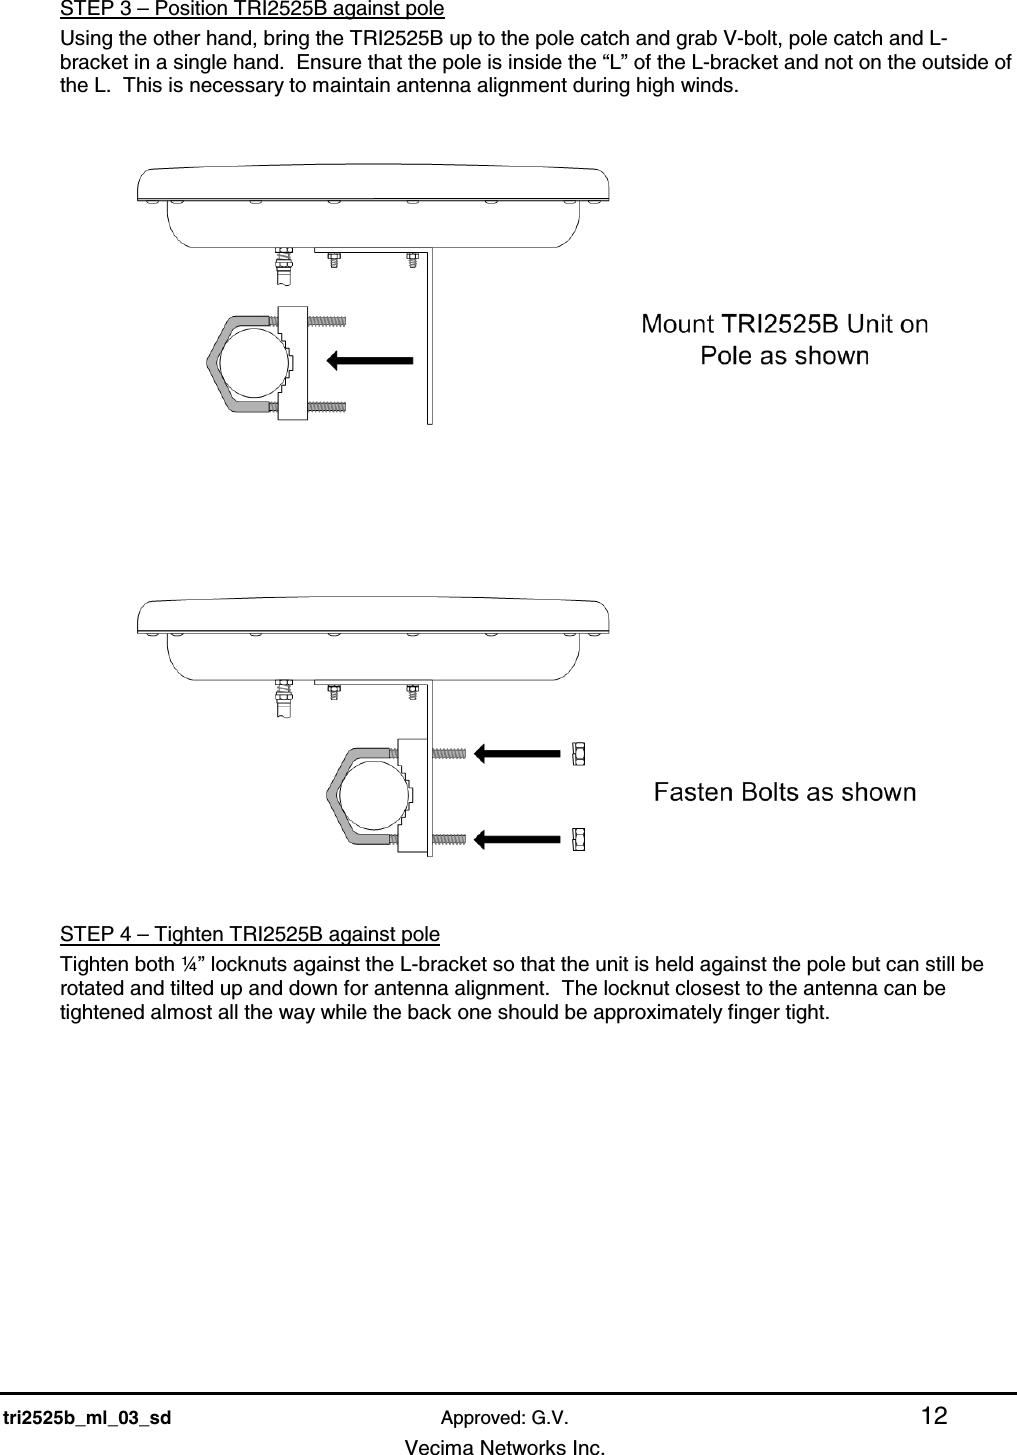    tri2525b_ml_03_sd Approved: G.V. 12   Vecima Networks Inc. STEP 3 – Position TRI2525B against pole Using the other hand, bring the TRI2525B up to the pole catch and grab V-bolt, pole catch and L-bracket in a single hand.  Ensure that the pole is inside the “L” of the L-bracket and not on the outside of the L.  This is necessary to maintain antenna alignment during high winds.      STEP 4 – Tighten TRI2525B against pole Tighten both ¼” locknuts against the L-bracket so that the unit is held against the pole but can still be rotated and tilted up and down for antenna alignment.  The locknut closest to the antenna can be tightened almost all the way while the back one should be approximately finger tight. 